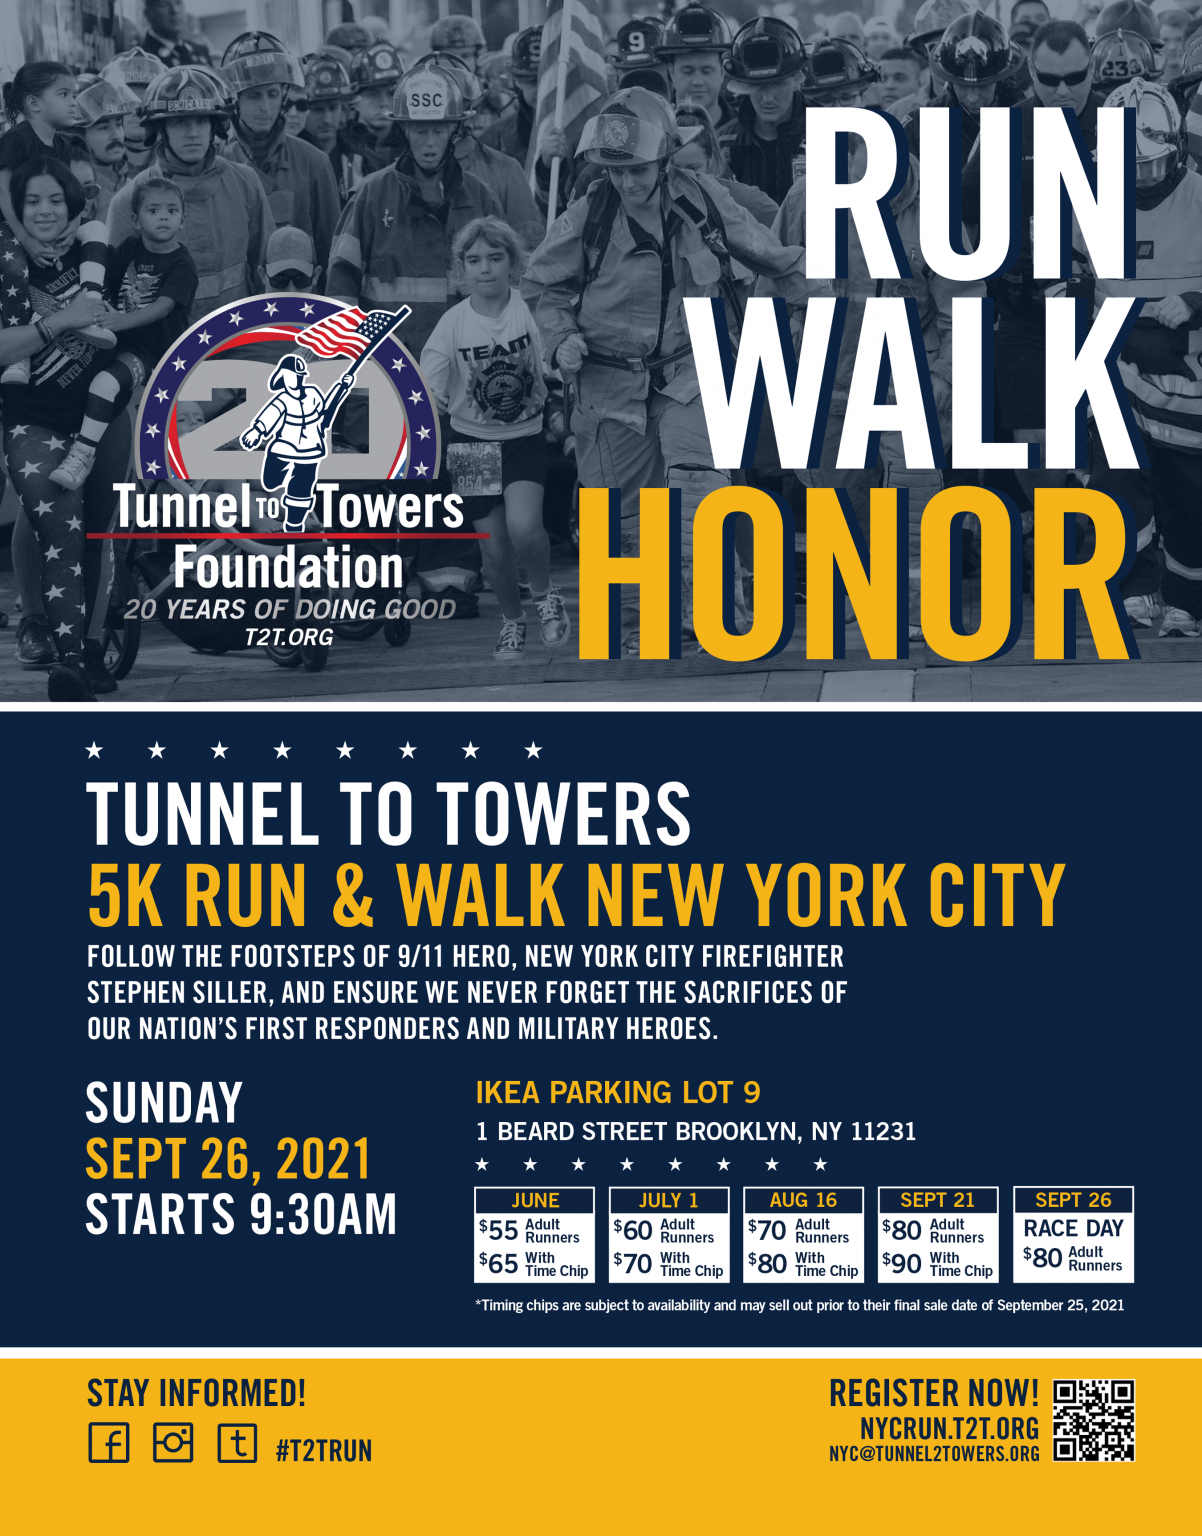 2021 Tunnel to Towers 5K Run & Walk New York City - Tunnel to Towers